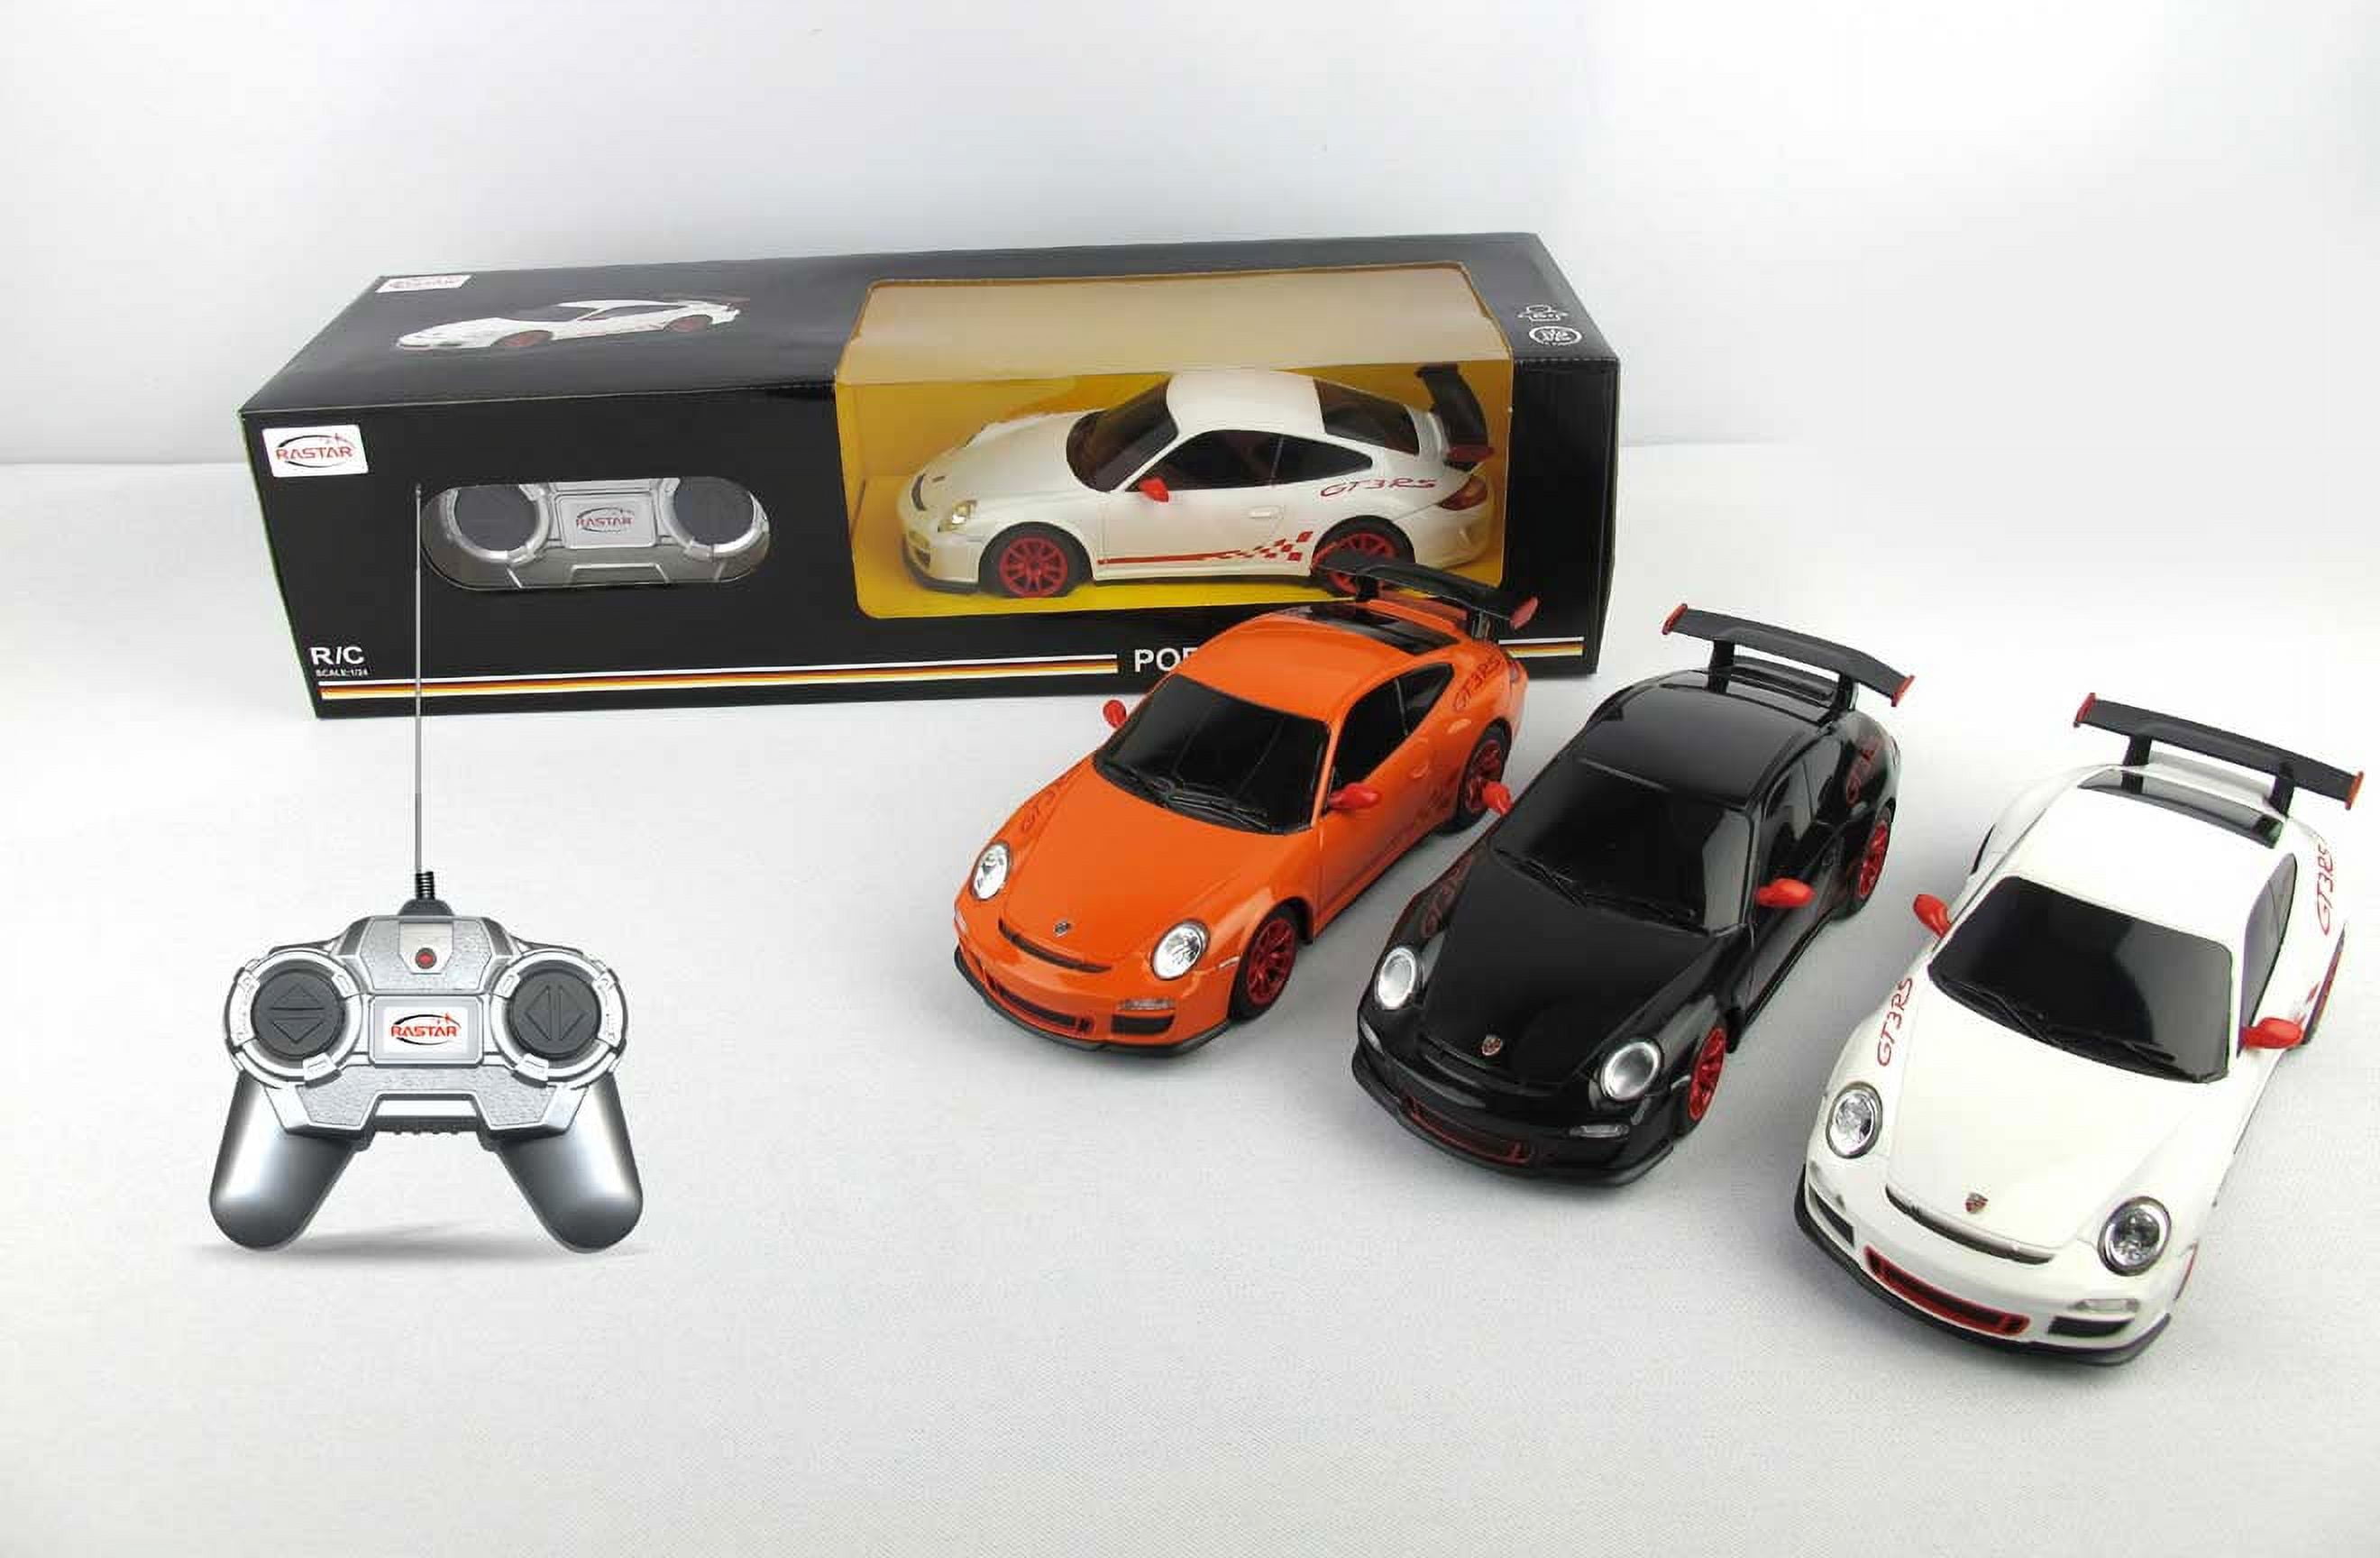 Porsche GT-1 RC Remote Control Car Kit Box & Misc. Parts Only Groupner  Racing